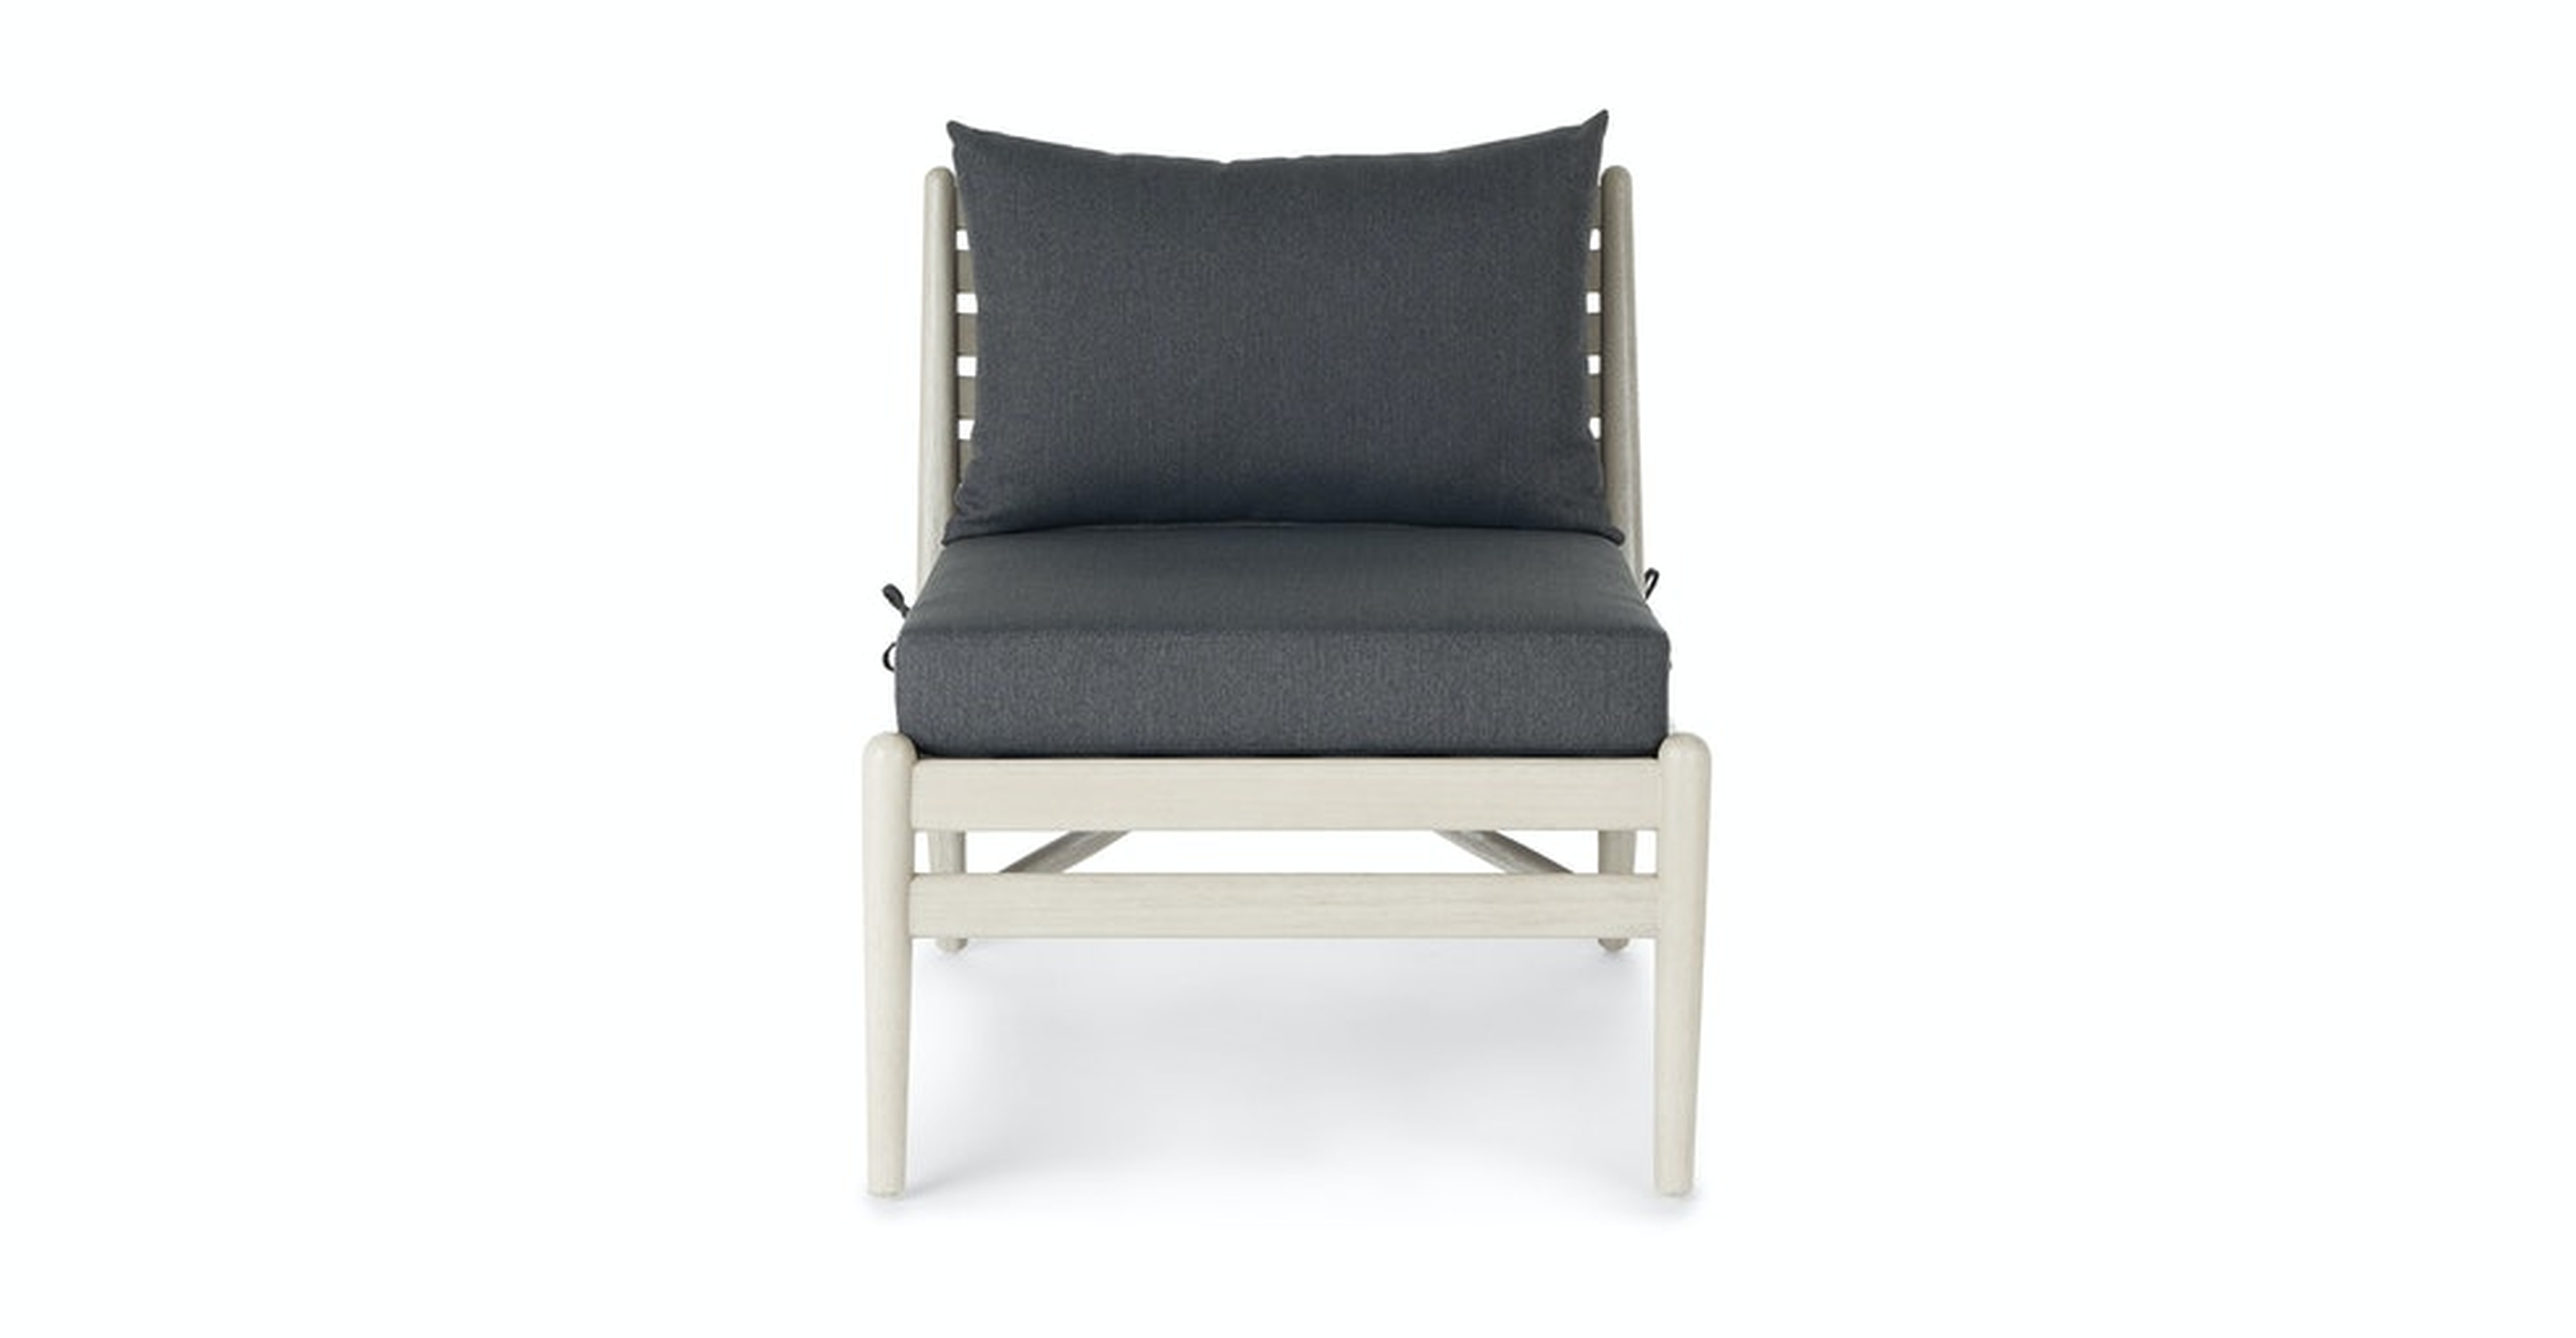 Lagora Washed Oak Lounge Chair - Article